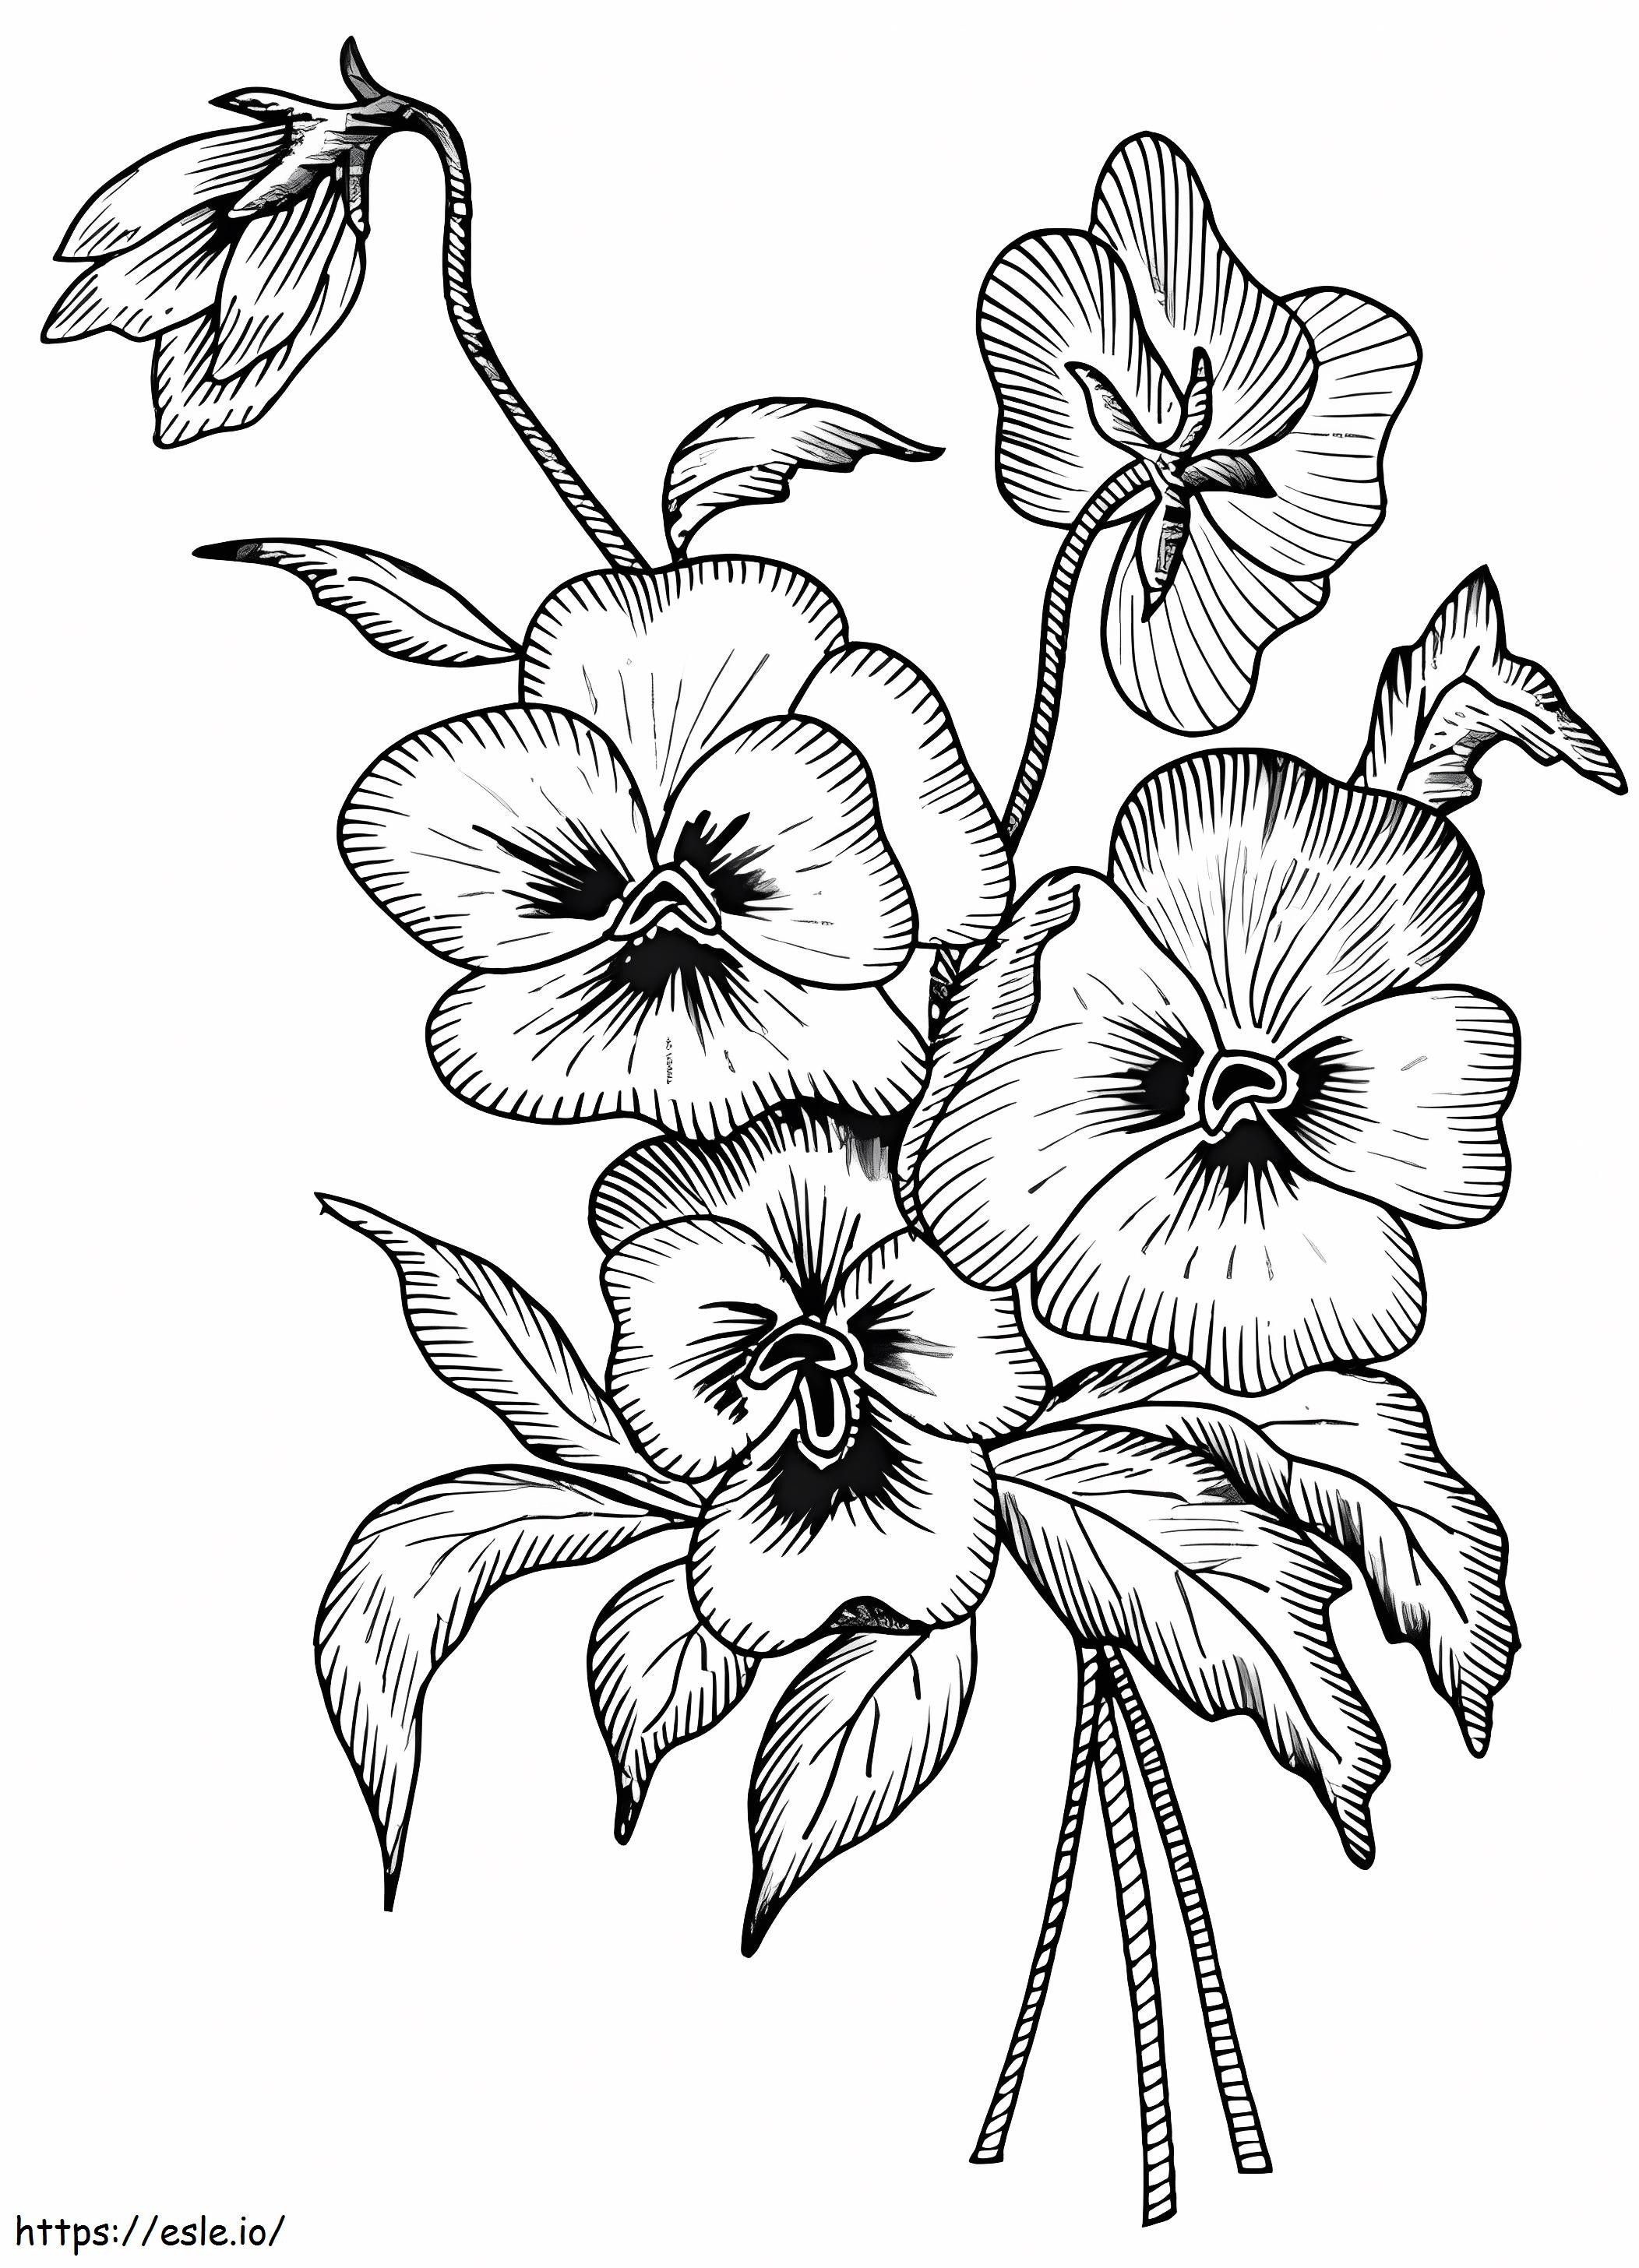 Pansy Bouquet coloring page